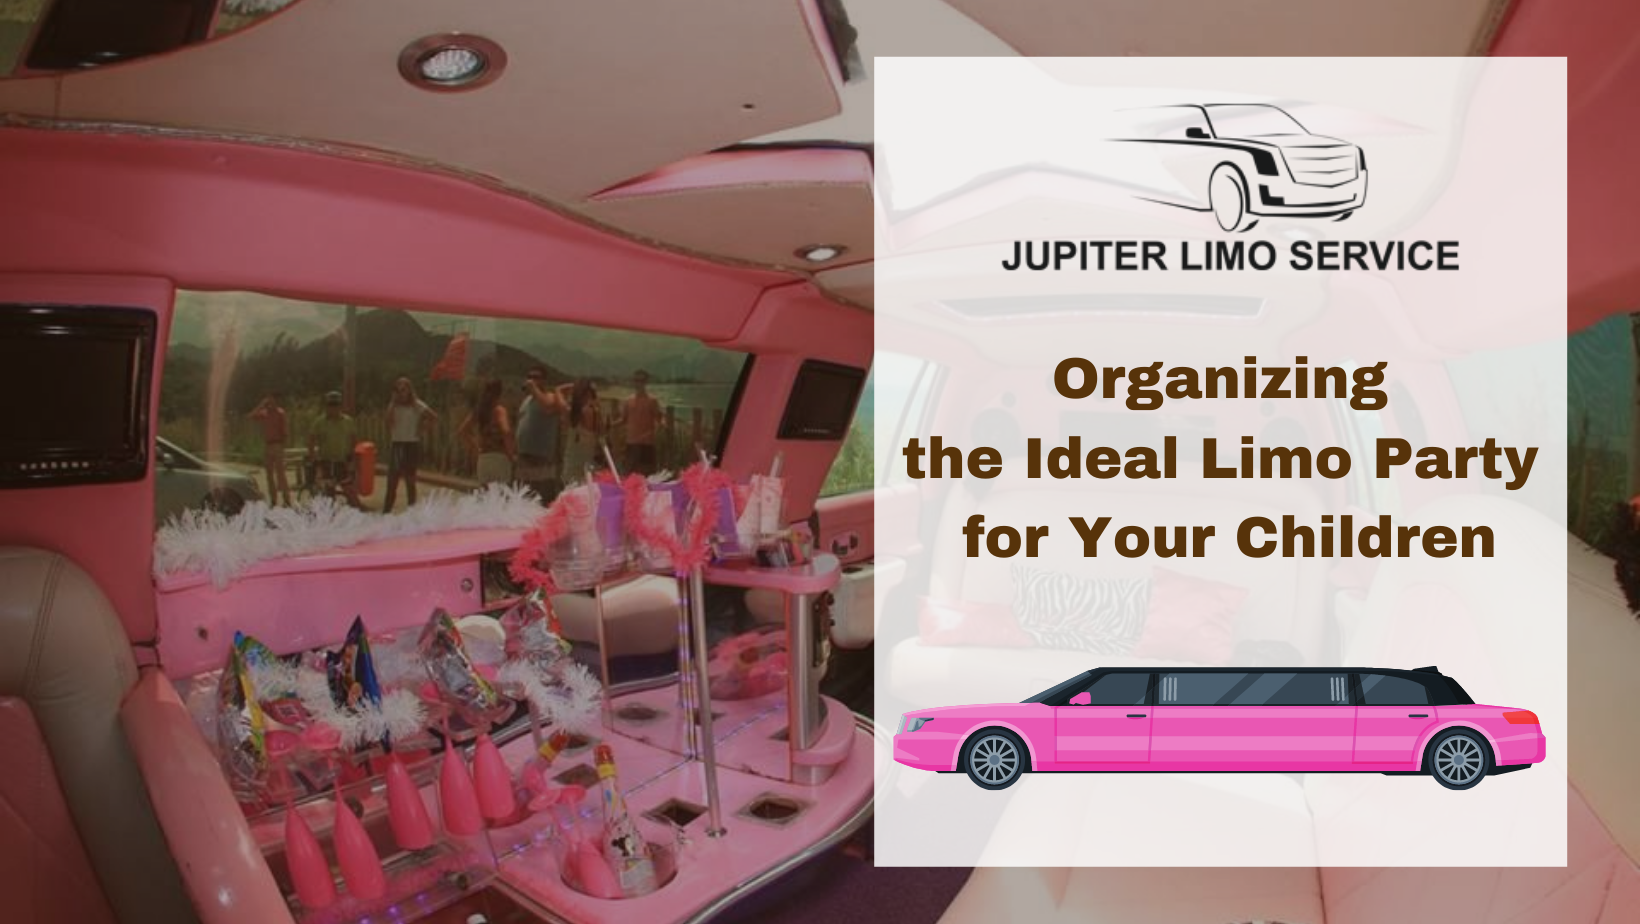 Organizing the Ideal Limo Party for Your Children